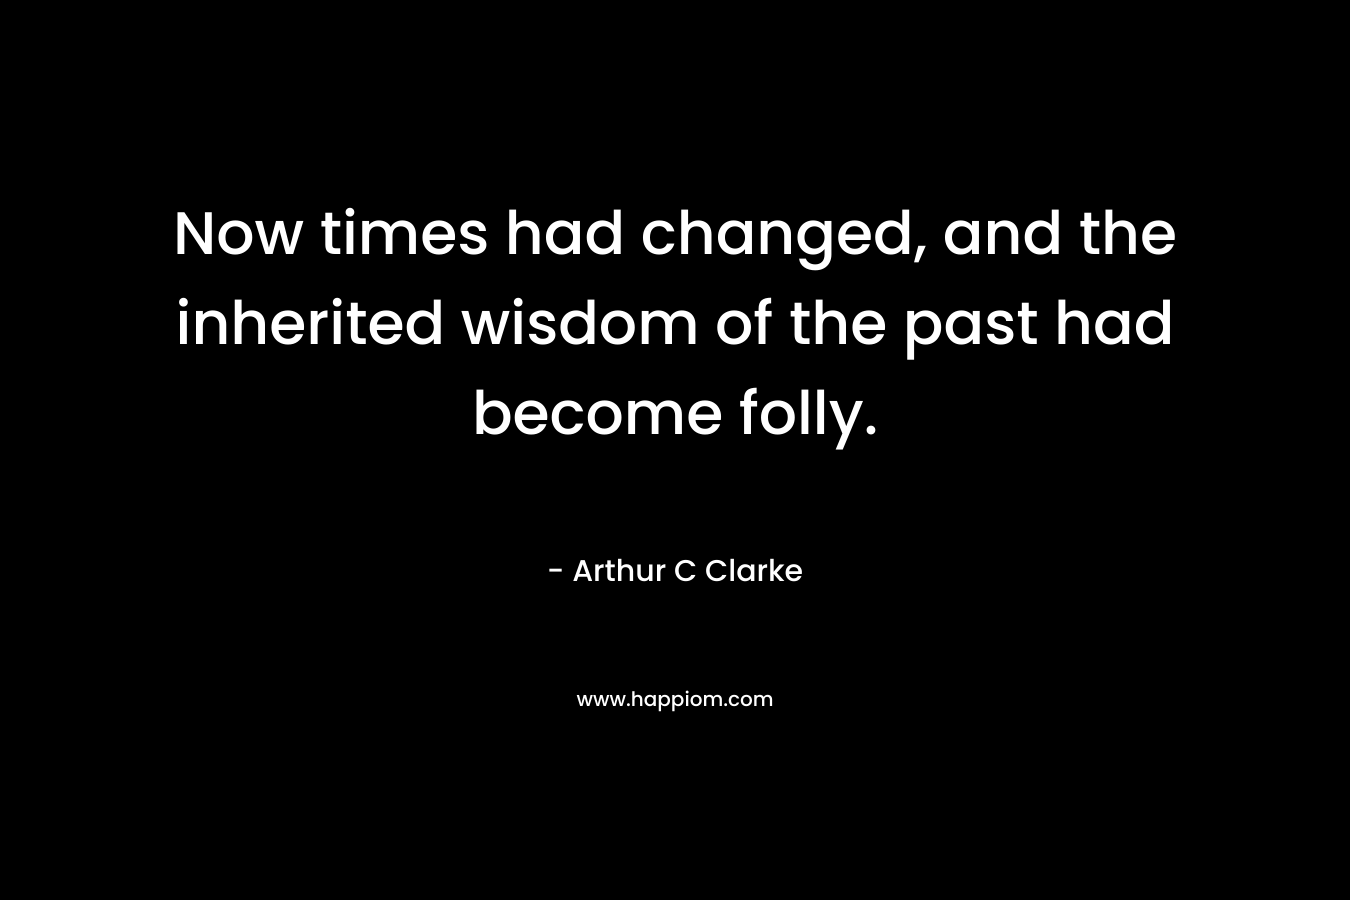 Now times had changed, and the inherited wisdom of the past had become folly. – Arthur C Clarke